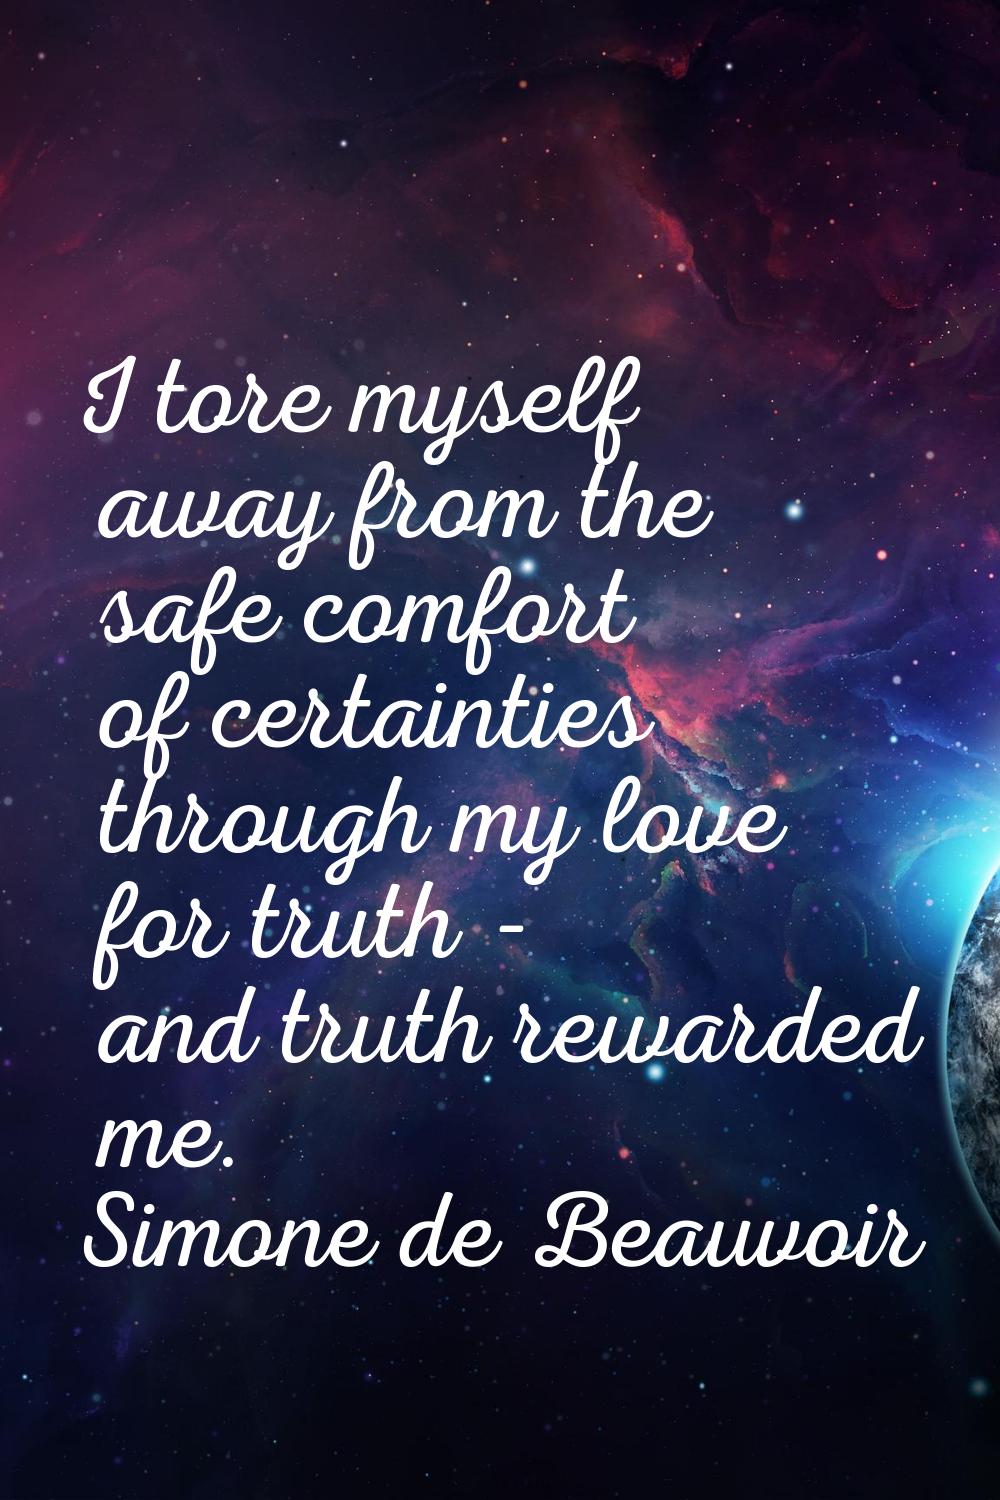 I tore myself away from the safe comfort of certainties through my love for truth - and truth rewar